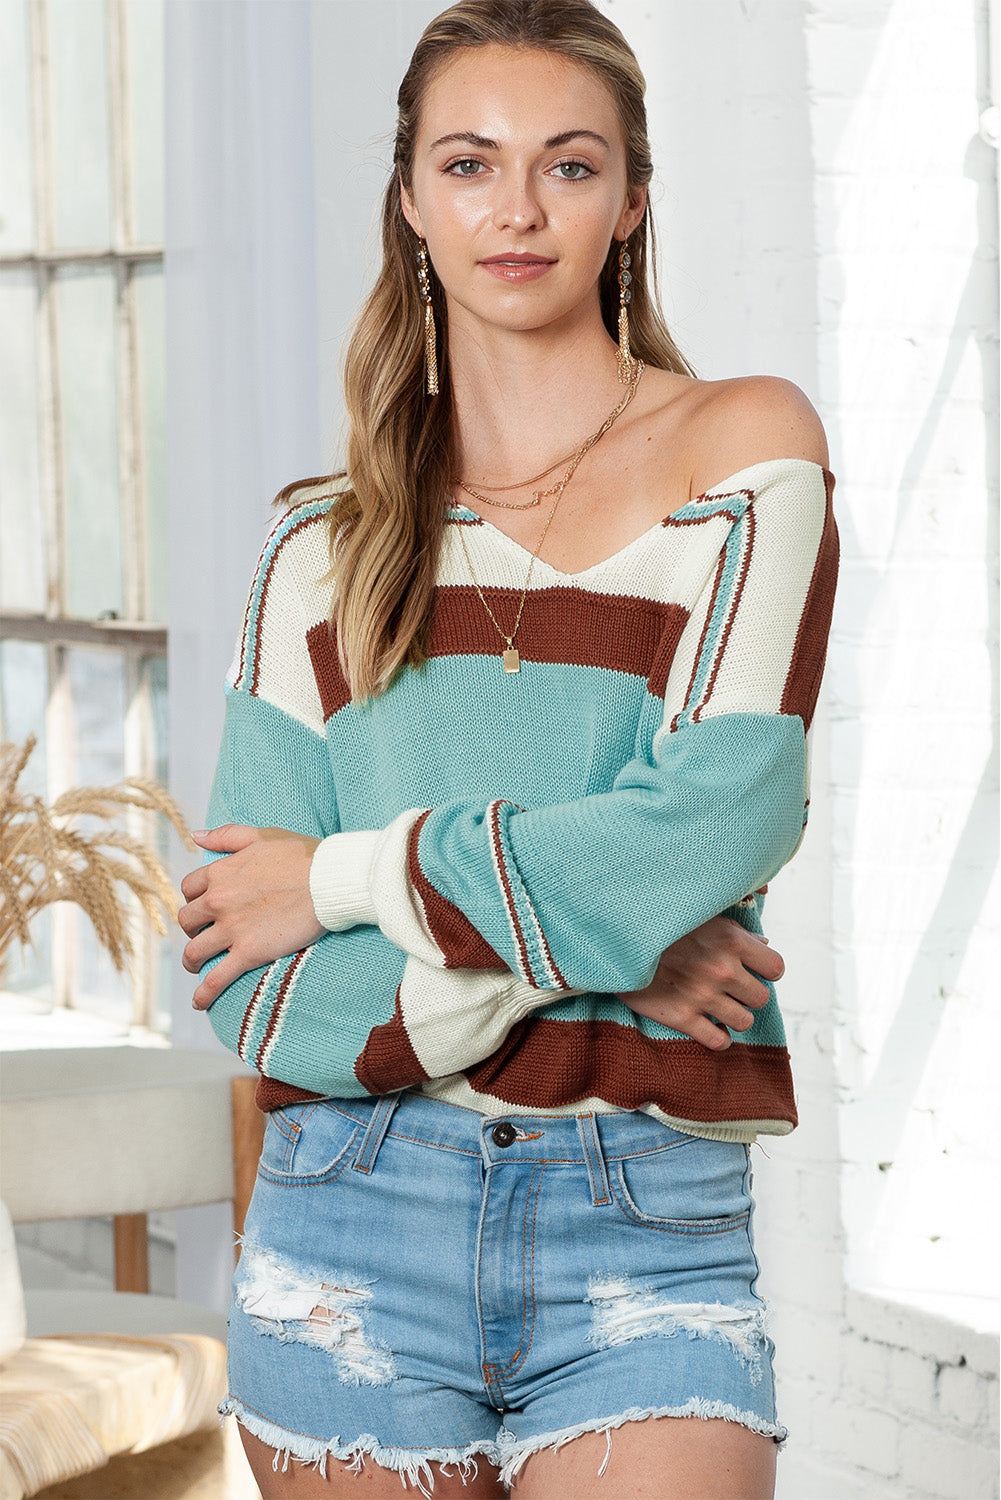 Sky blue and rust v neck sweater